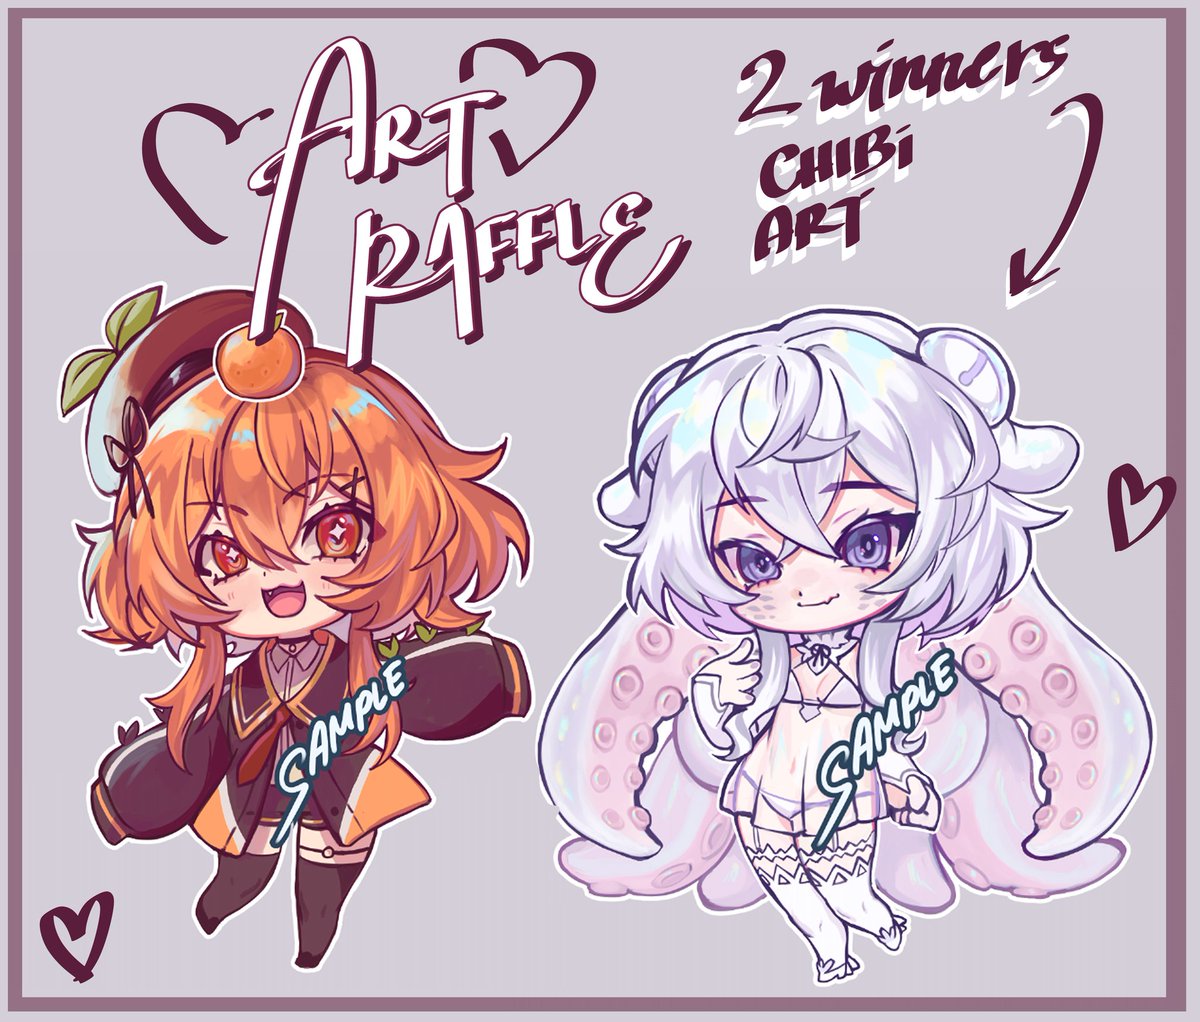 🍓 ART RAFFLE 🍓

Hello. I'll be doing an art raffle for this chibi artstyle✌️✨️ here are the raffle info:

▪︎ Must follow and retweet this post to enter!
▪︎ Closes on May 1
▪︎ No raffle accounts
• If you want a guaranteed art of this chibi, buy from me for $100. DM me🔥